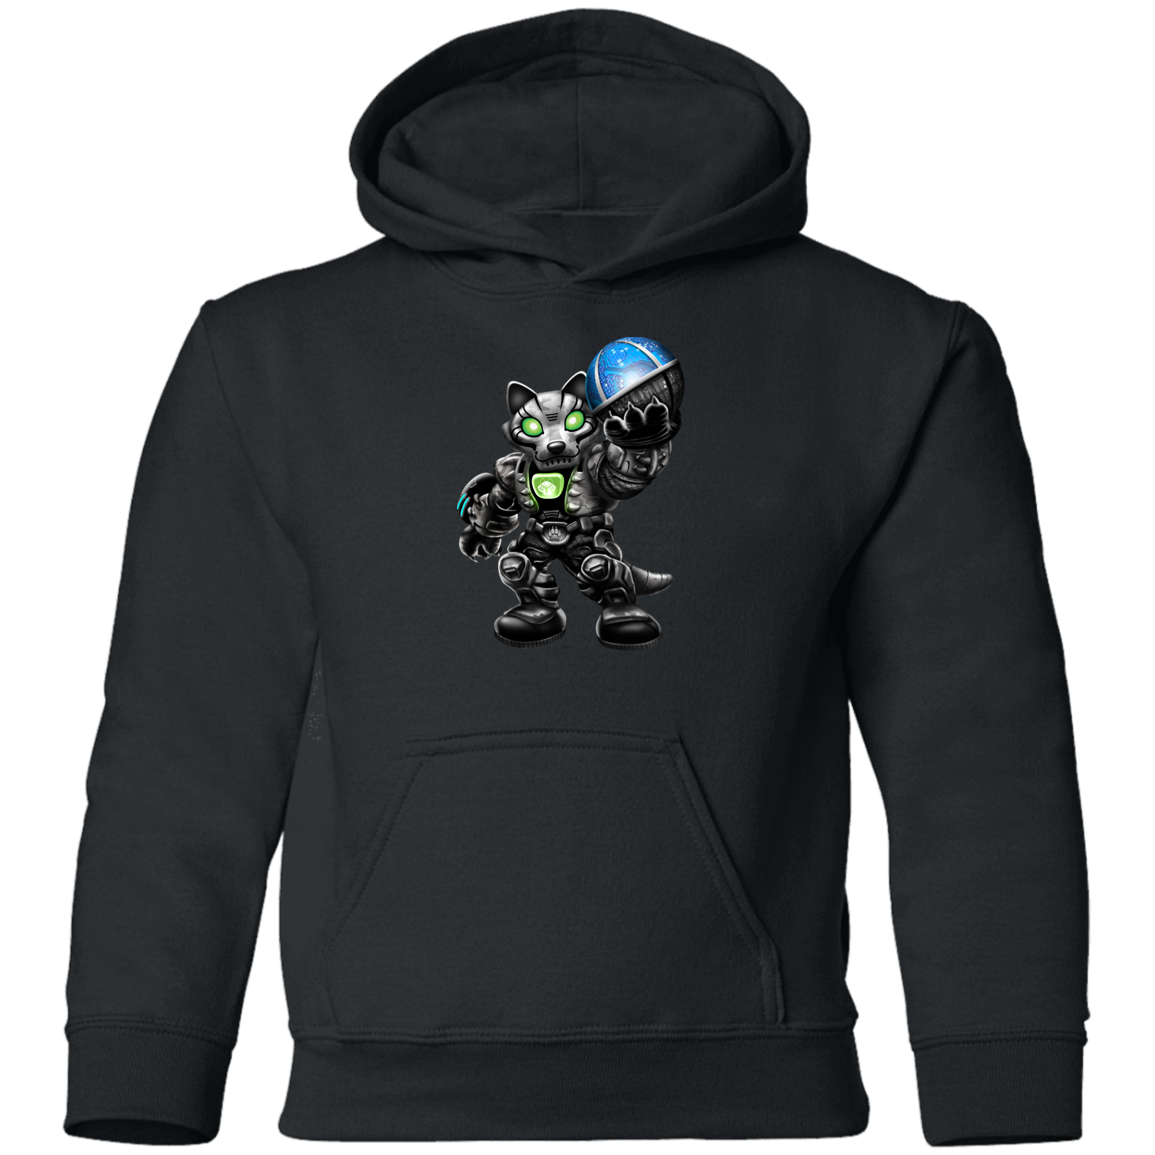 Chomper with Morning Glory Weapon Hoodie for Kids